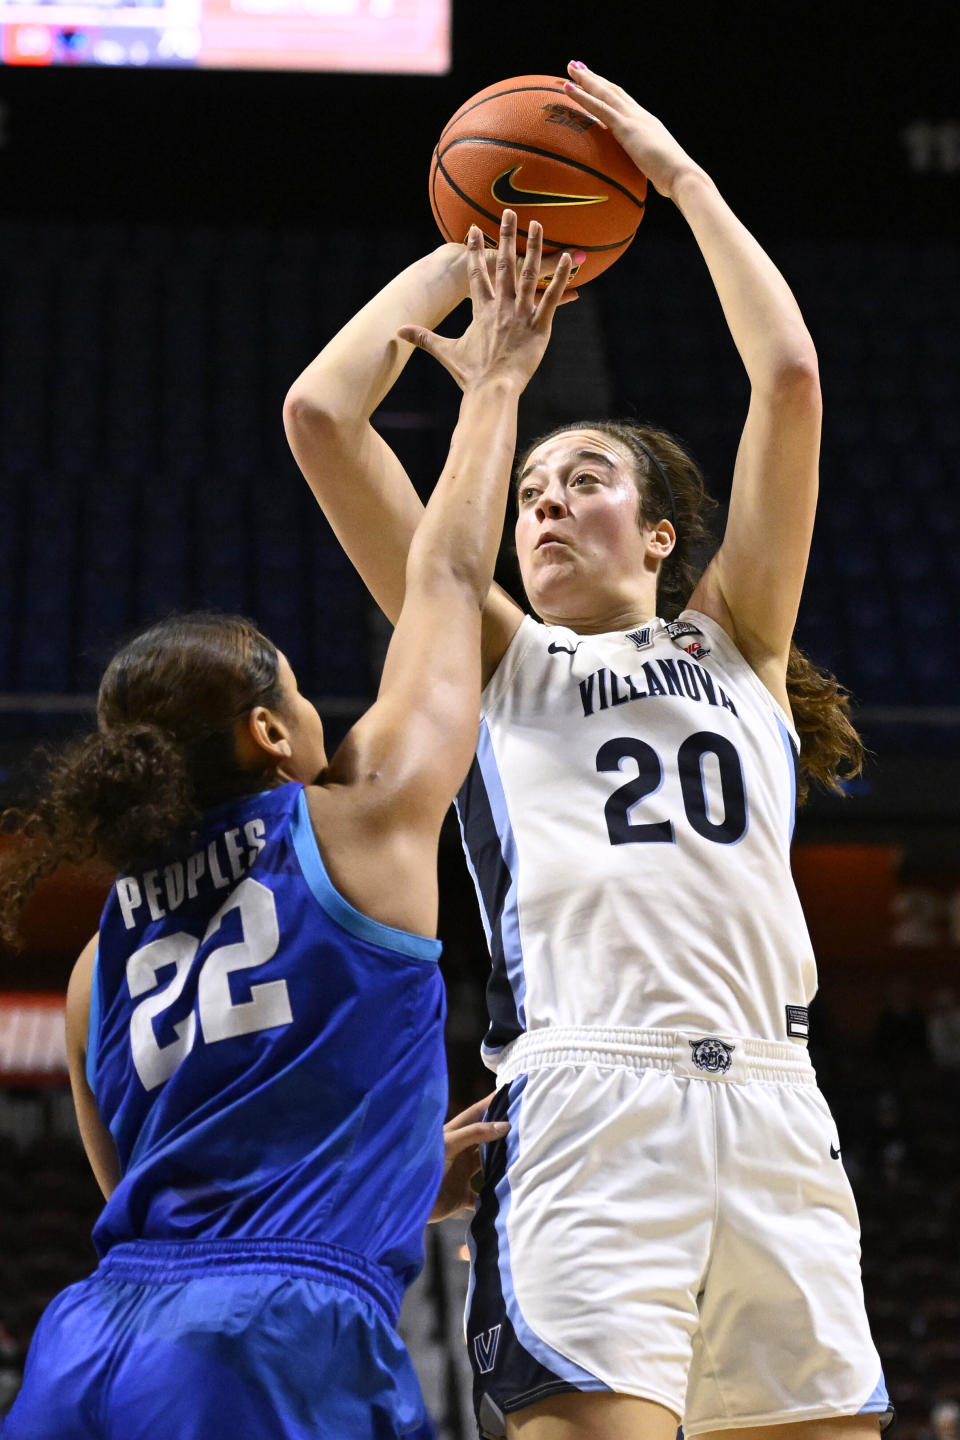 FILE - Villanova's Maddy Siegrist (20) shoots over DePaul's Anaya Peoples (22) during the second half of an NCAA college basketball game in the quarterfinals of the Big East Conference tournament at Mohegan Sun Arena, Saturday, March 4, 2023, in Uncasville, Conn. Siegrist was honored as an All-American by The Associated Press on Wednesday, March 15, 2023. (AP Photo/Jessica Hill, File)